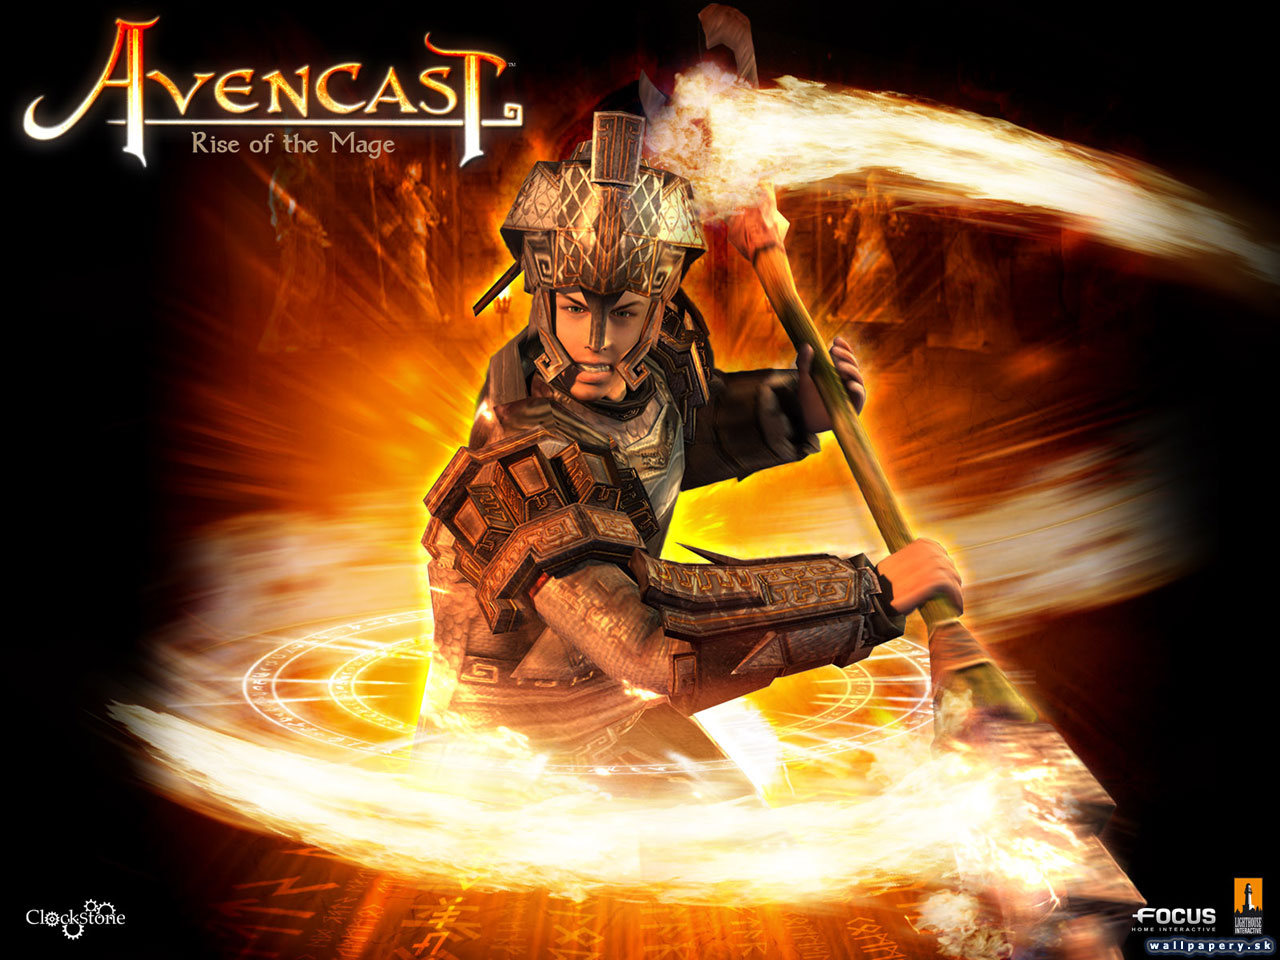 Avencast: Rise of the Mage - wallpaper 1